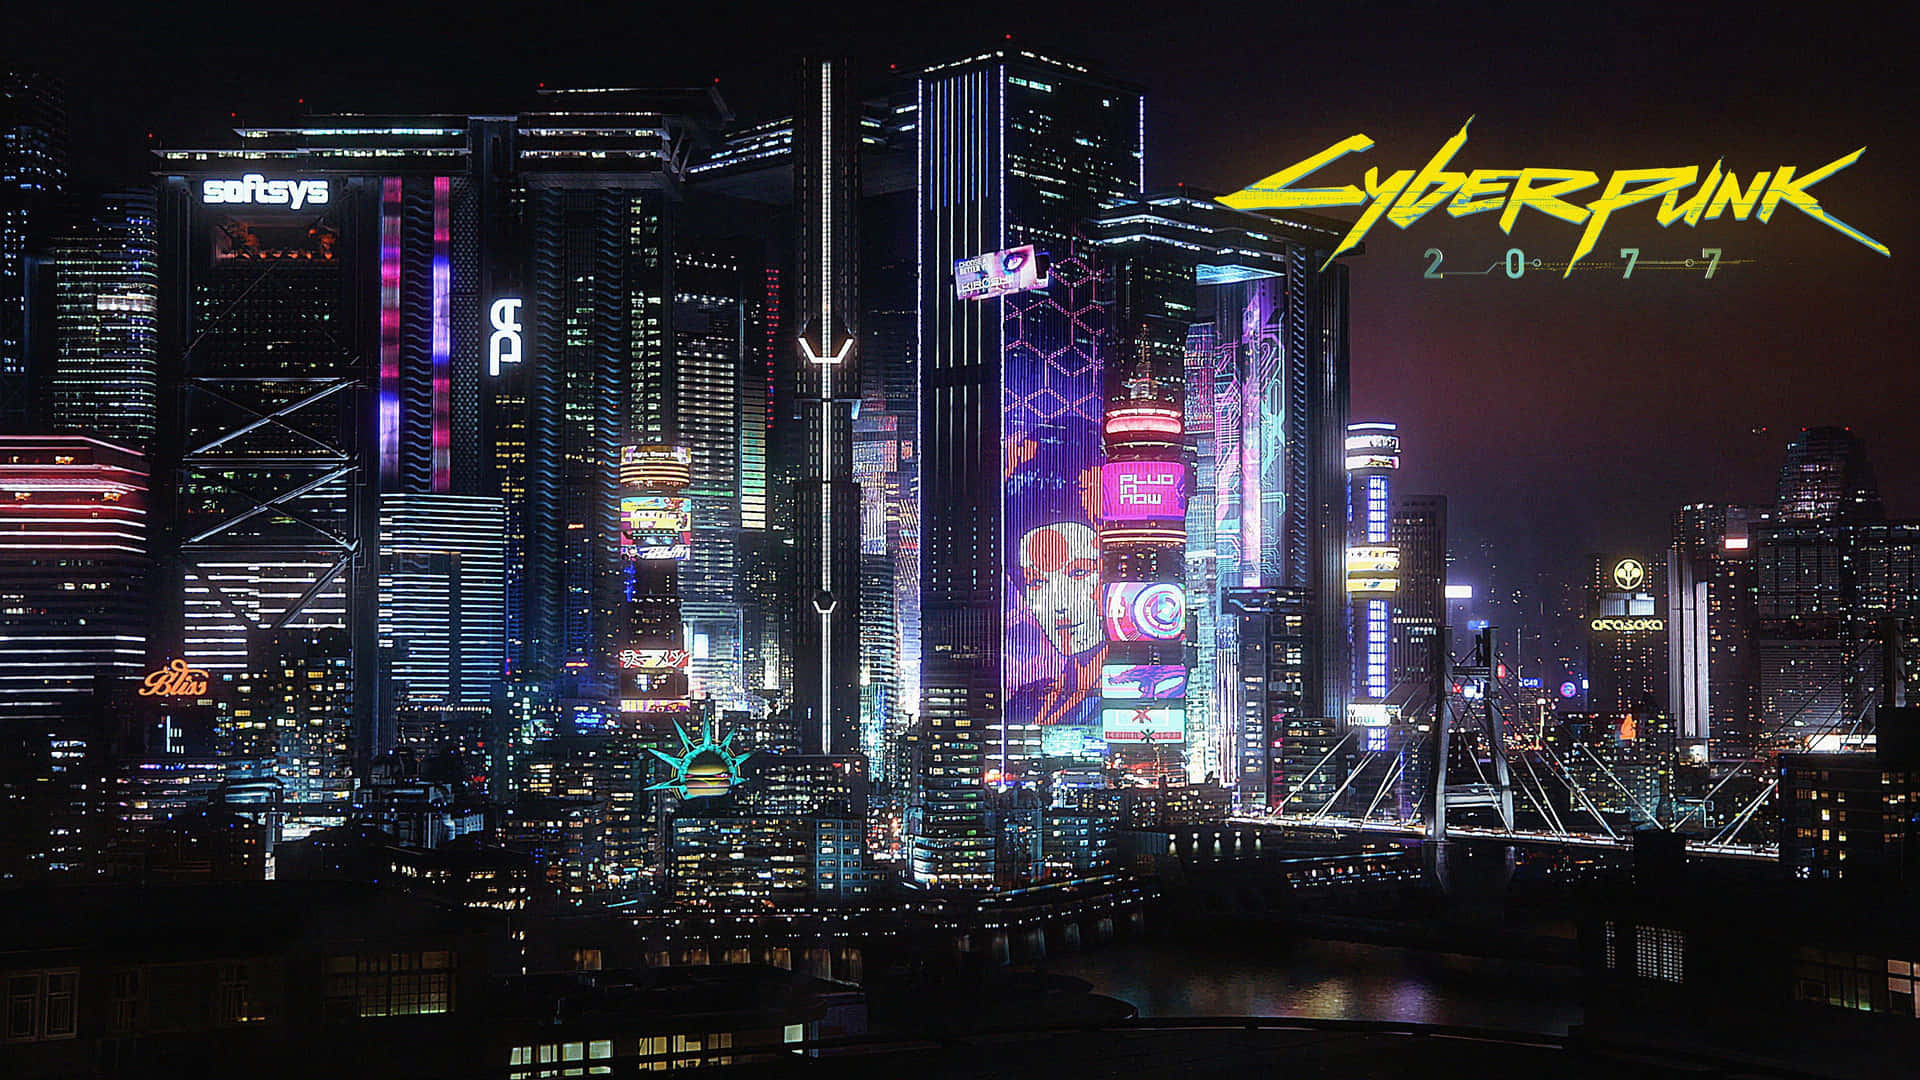 Discover the eclectic Cyberpunk Aesthetic with its urban flare and neon lights. Wallpaper